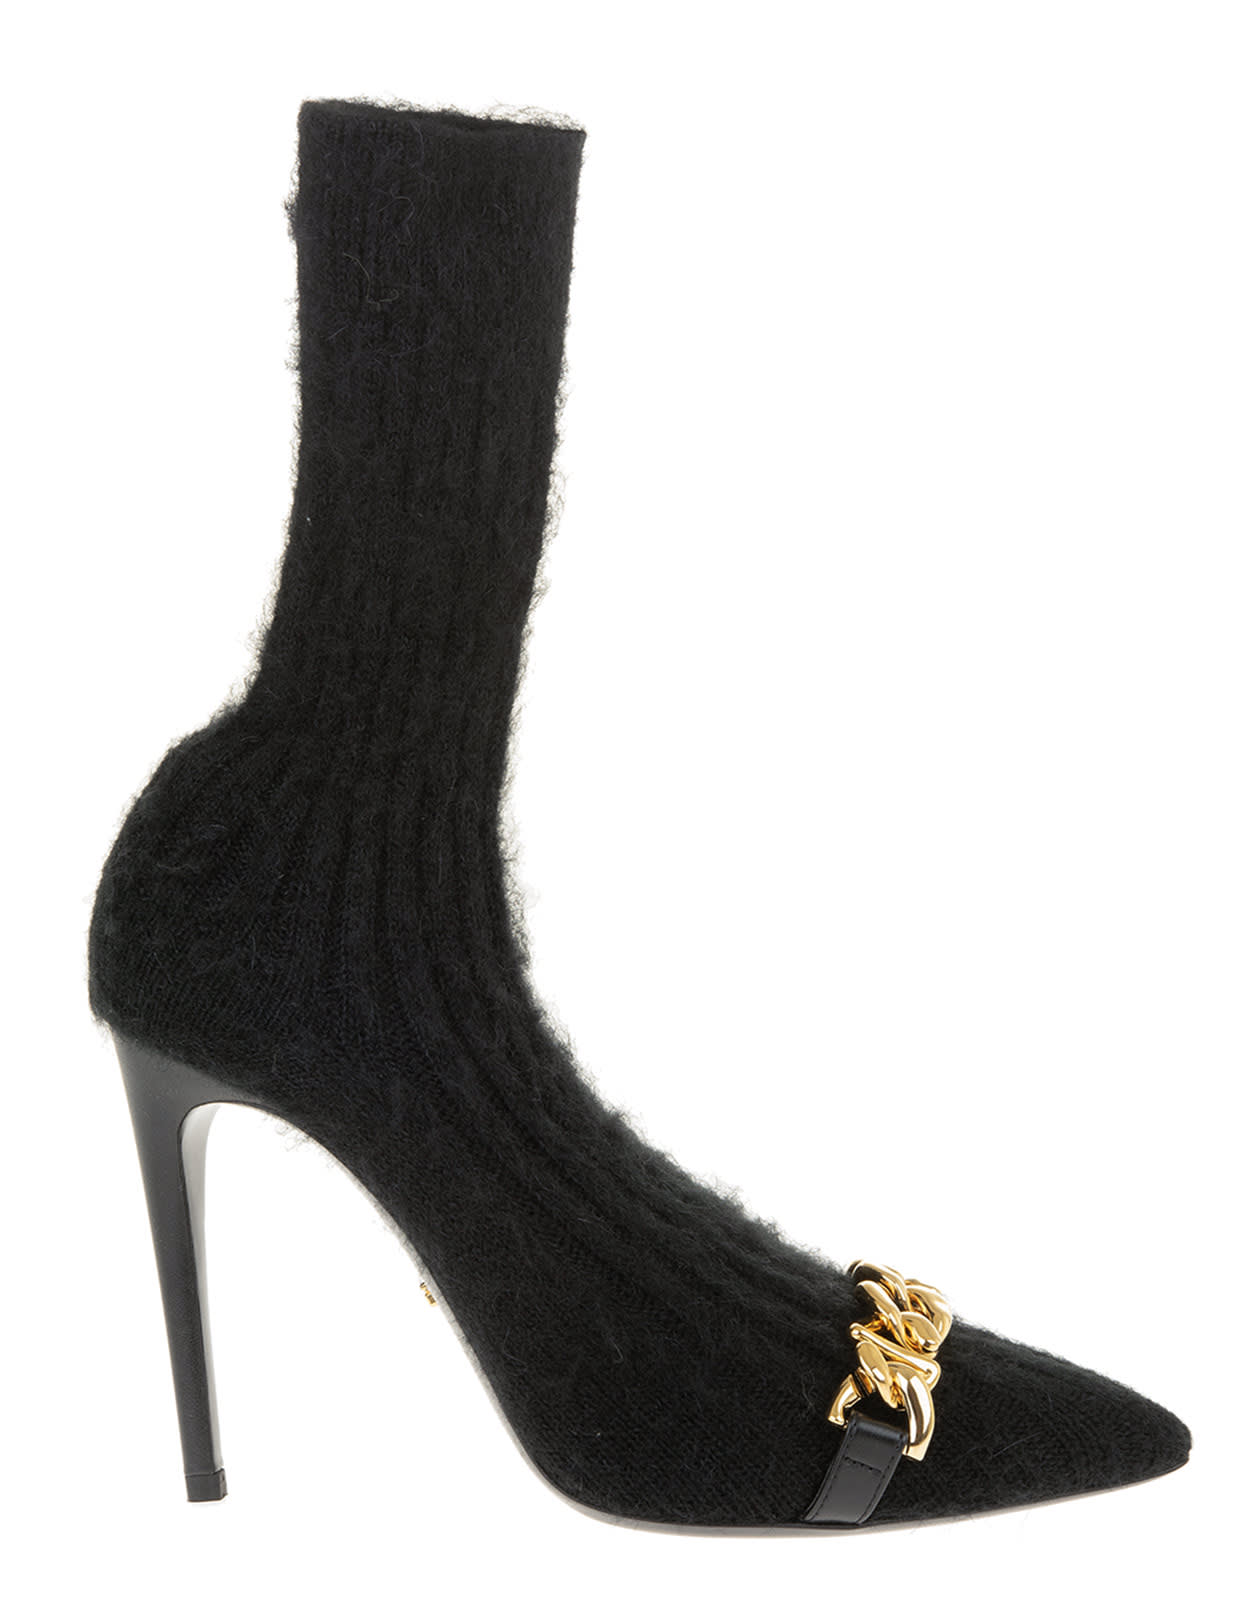 Woman Black Ankle Boot With Golden Gcds Logo Chain